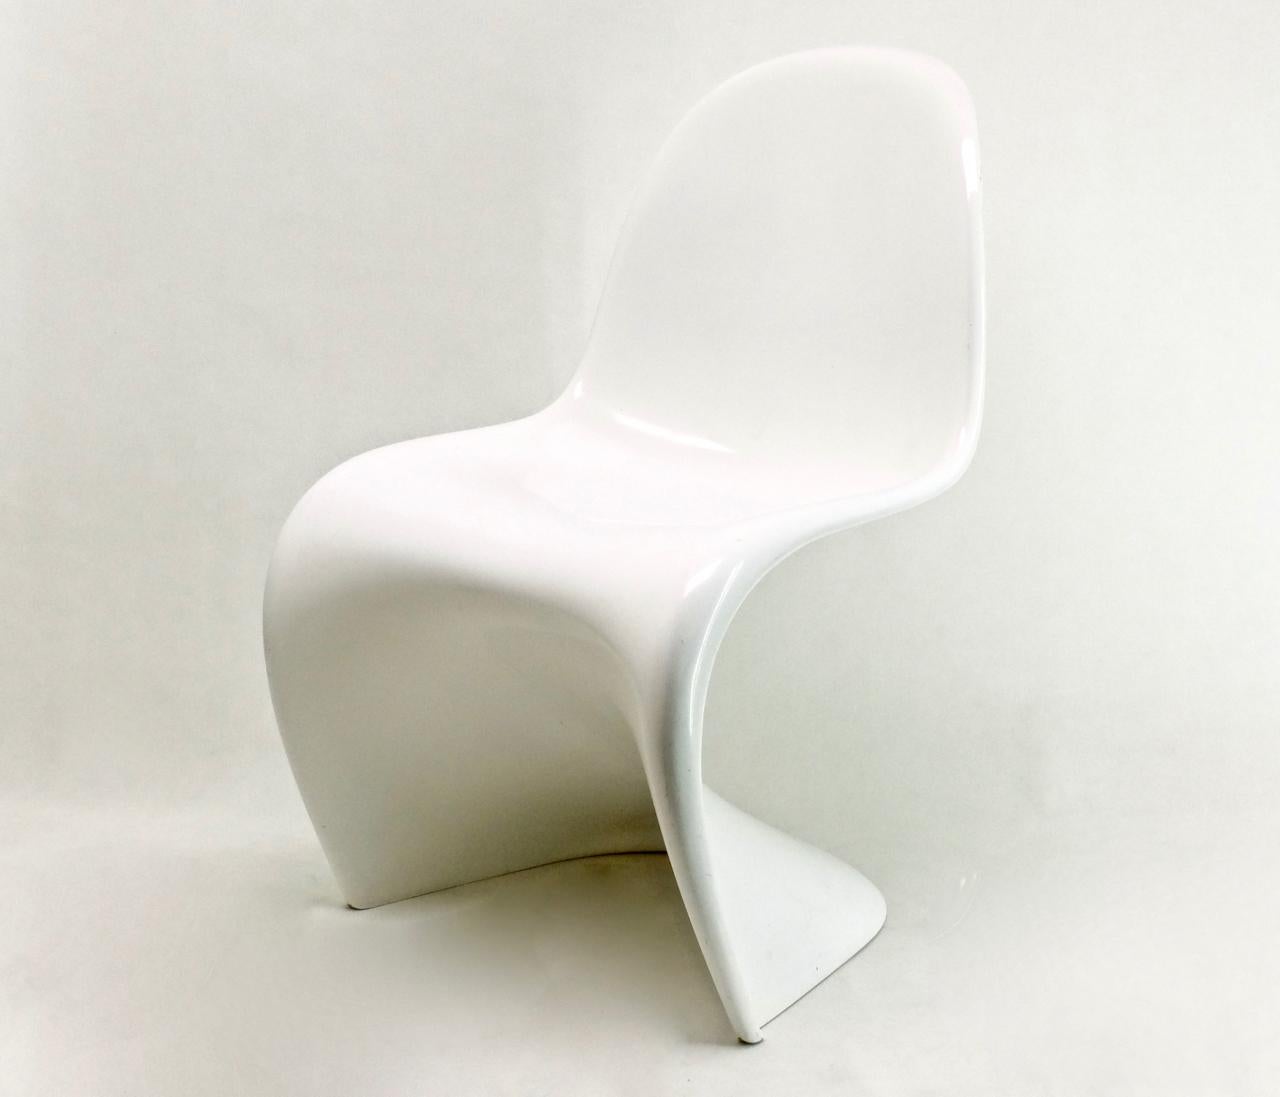 First produced series of the well-known Panton Chair made of polyurethane hard foam (Baydur) painted white. Production only from 1968 to 1971! 

Execution: Herman Miller / Fehlbaum Production / Vitra.

A groundbreaking event designing chairs was the